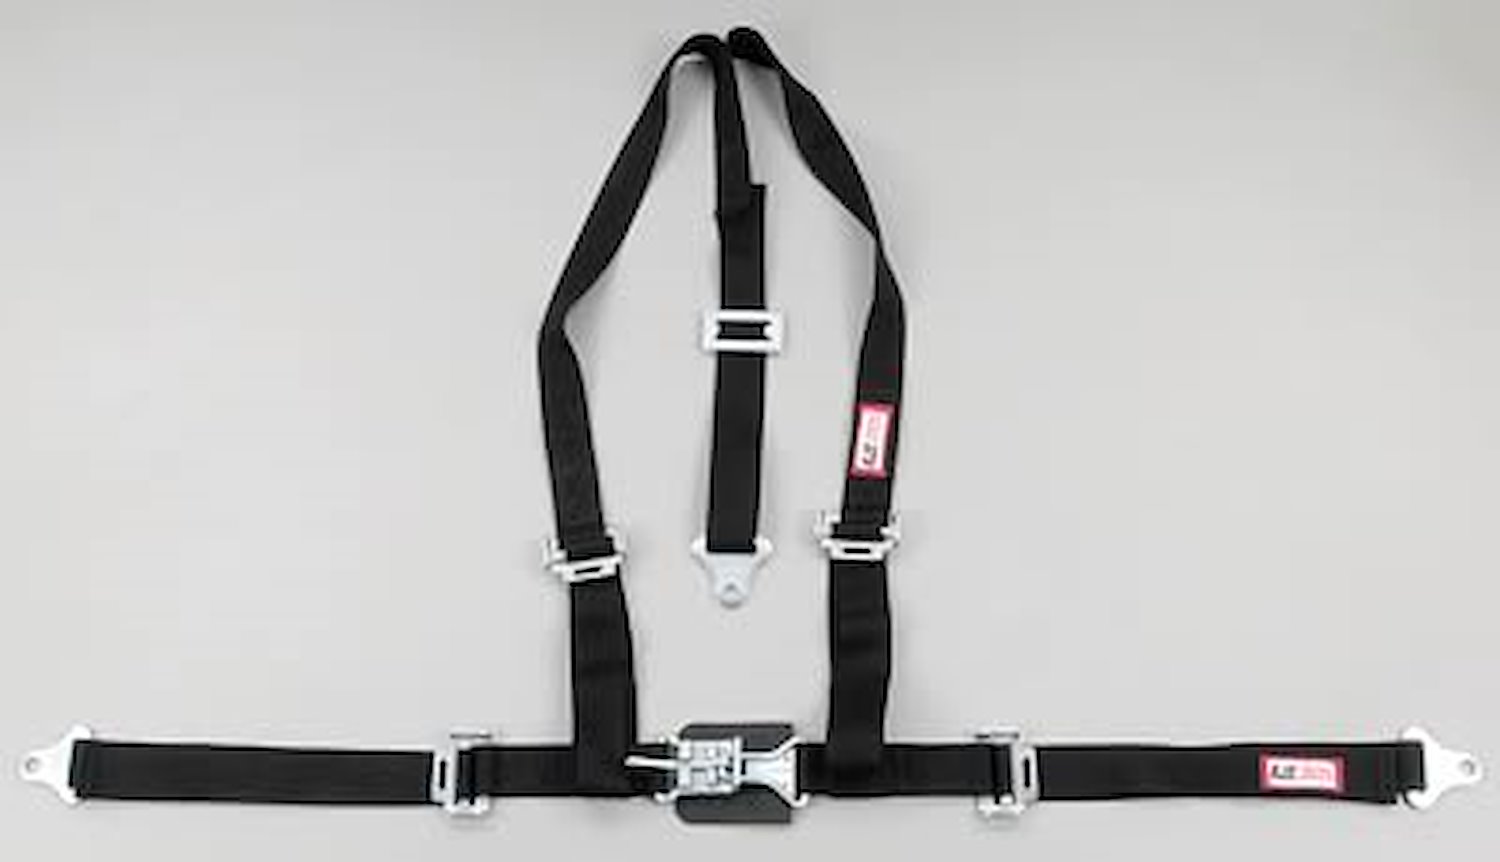 NON-SFI L&L HARNESS 2 PULL DOWN Lap Belt SNAP SEWN IN 2 S.H. INDIVIDUAL FLOOR Mount w/STERNUM STRAP WRAP/BOLT RED